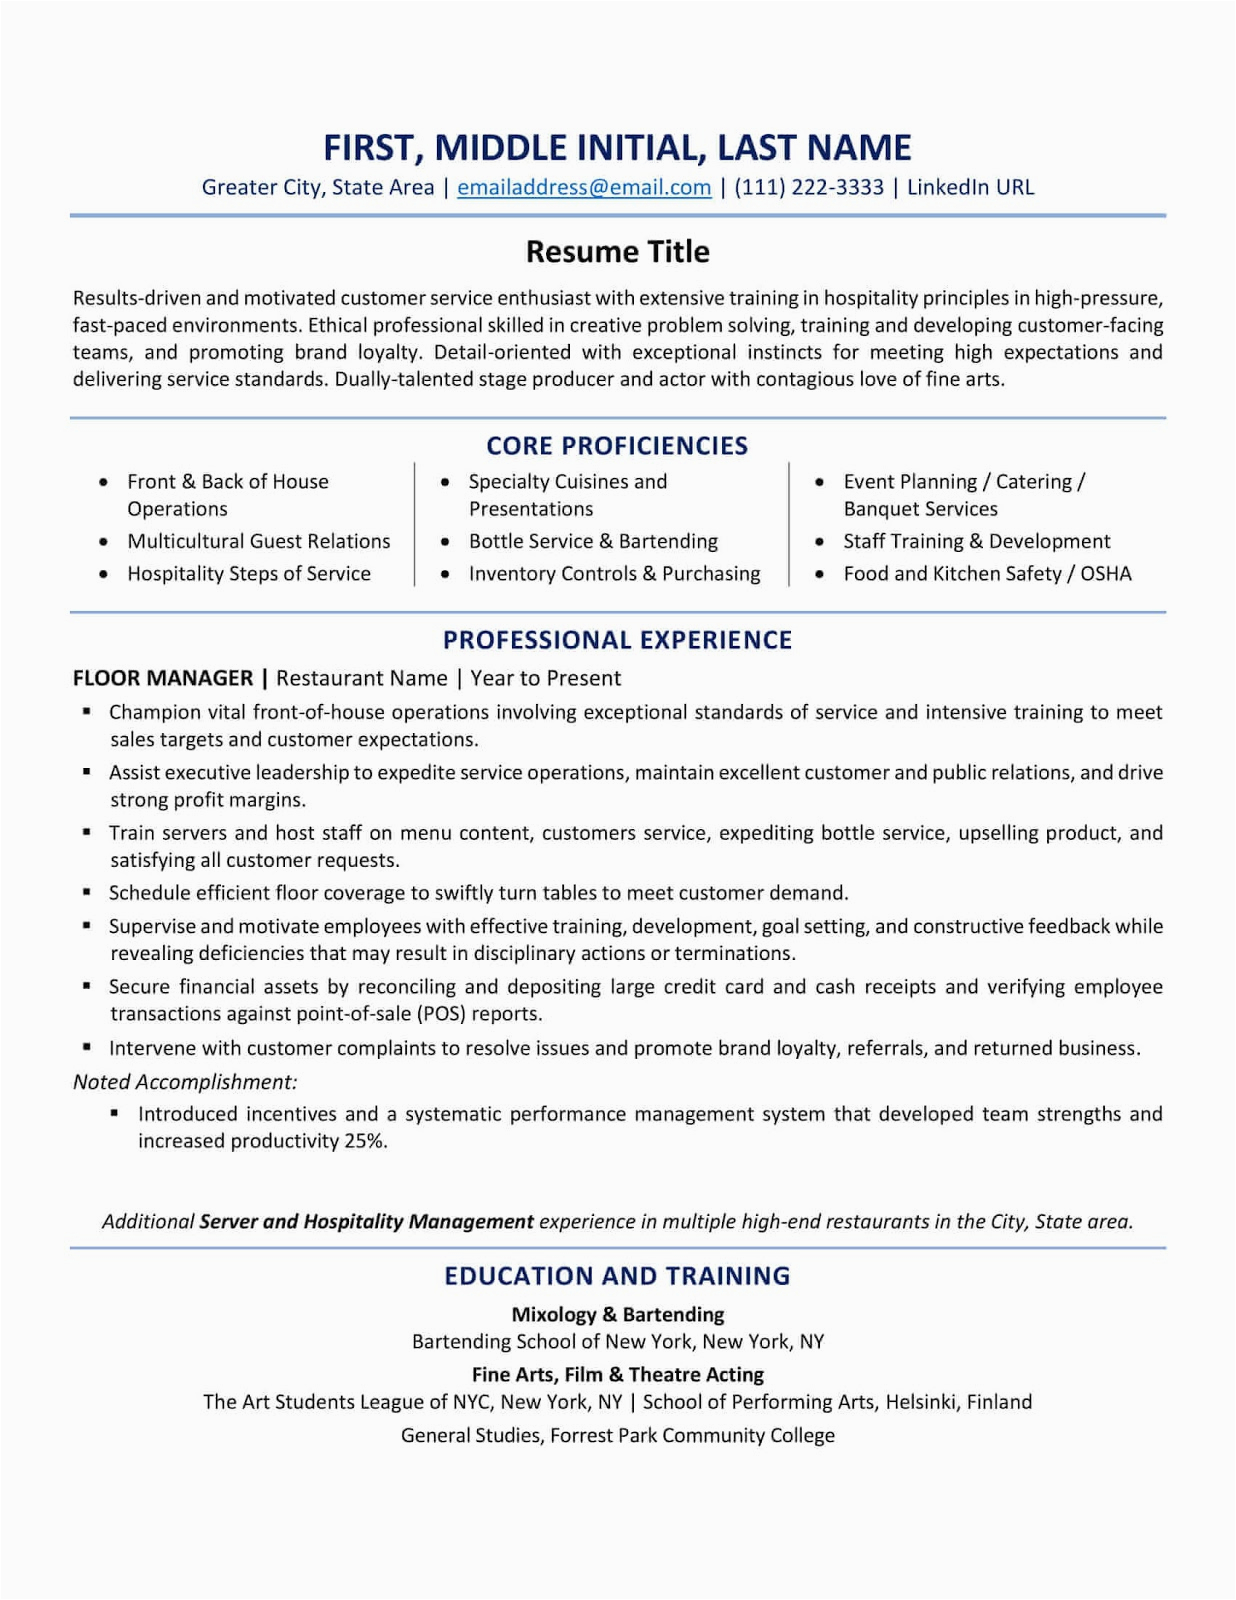 Resume Samples Canada for It Professionals Canada Resume format Best Tips and Examples Updated